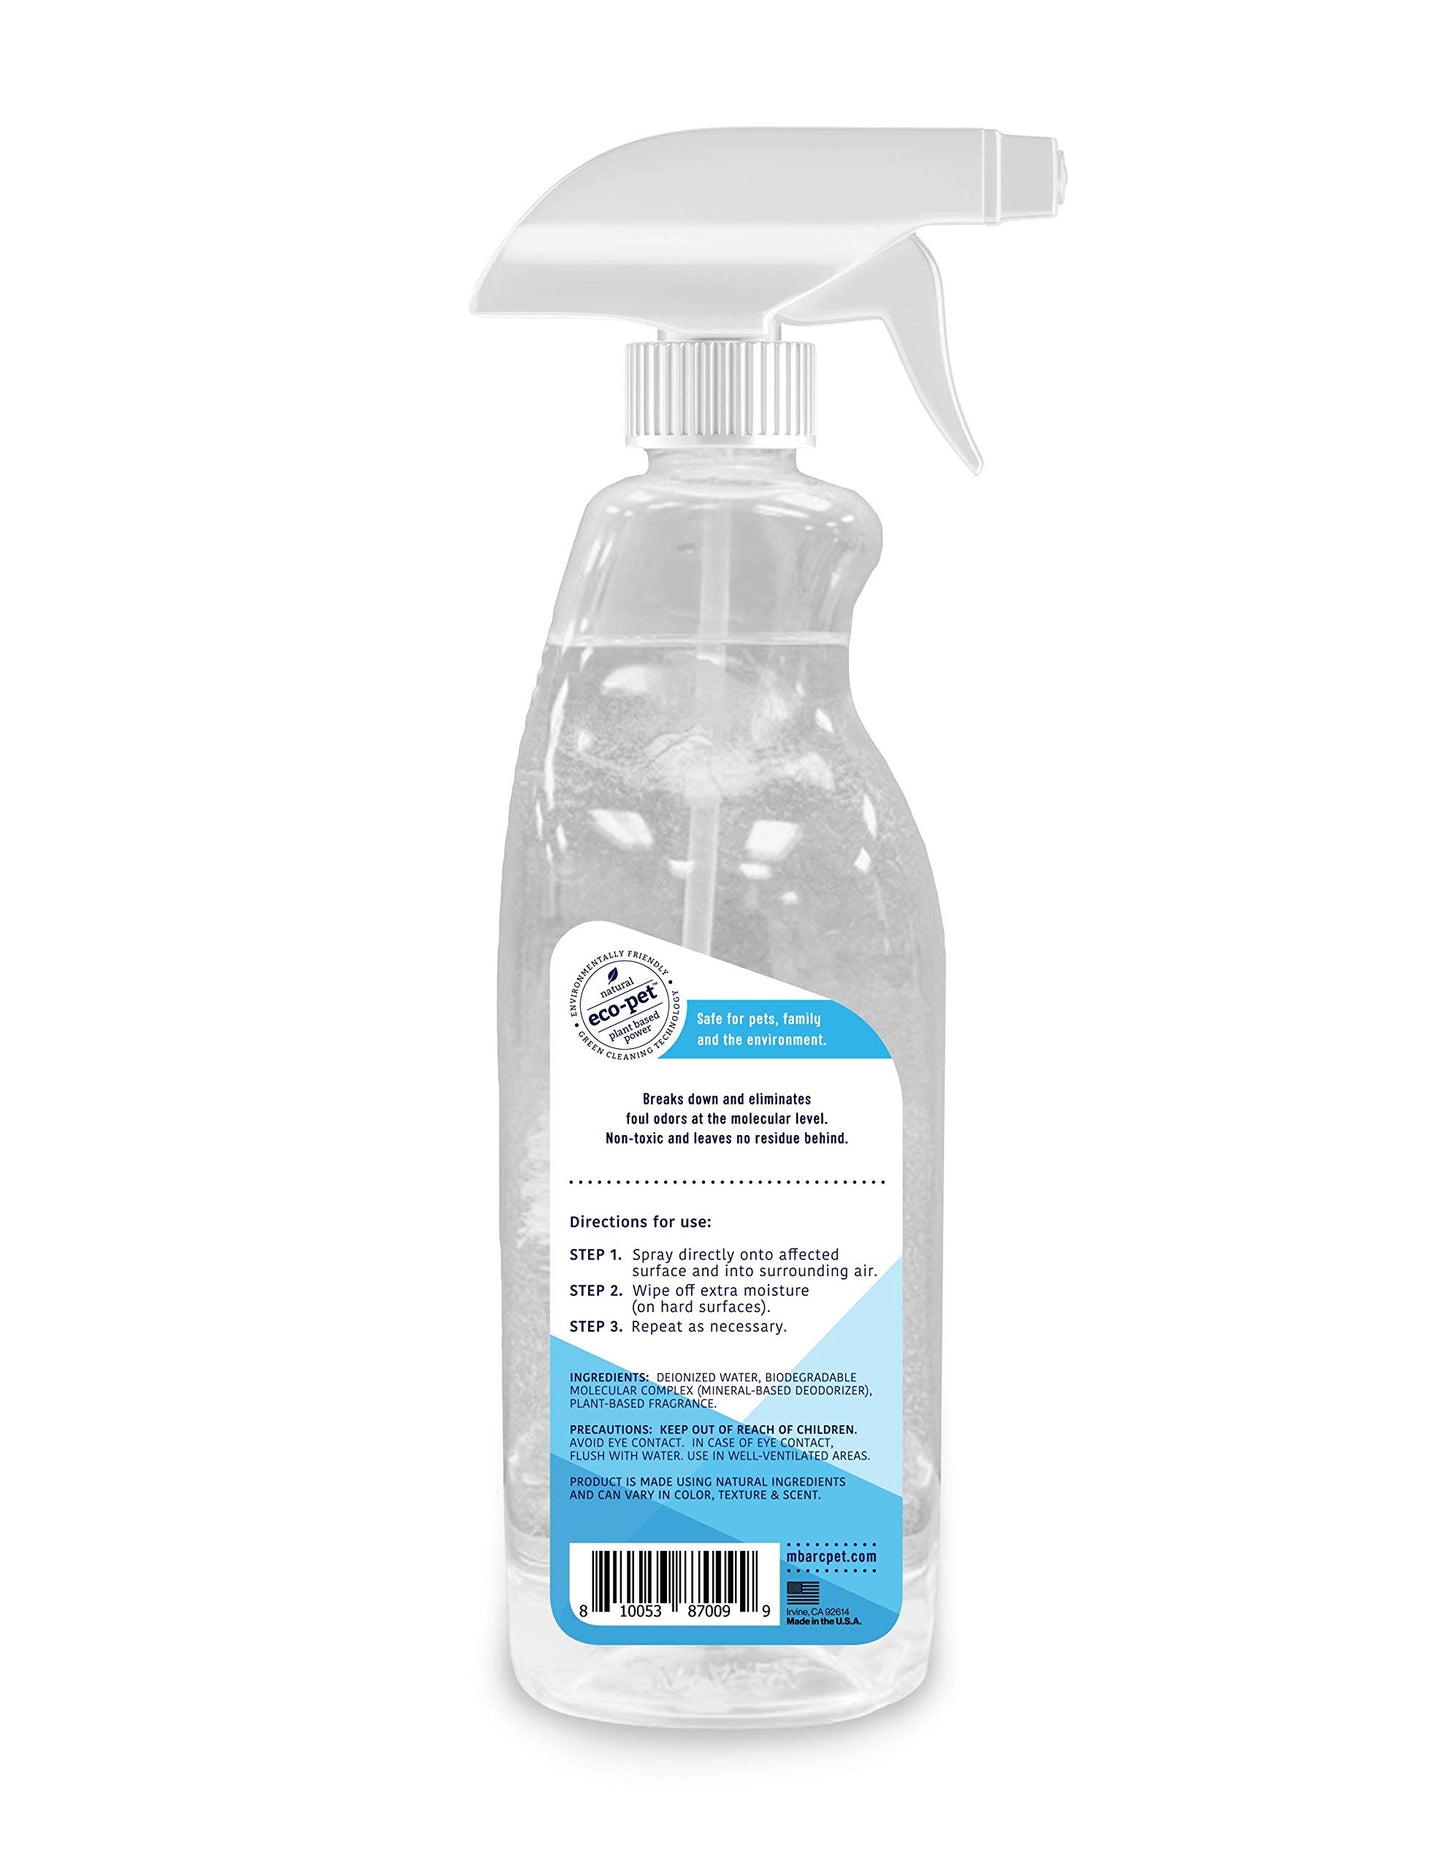 M.BARC Naturals Pet Odor Eliminator Spray 28oz. (2-Pack) - Eliminate Pet Odors from Your Home - Natural Odor Destroyer for Pet Beds and Spaces with Those Nasty Cat & Dog Odors